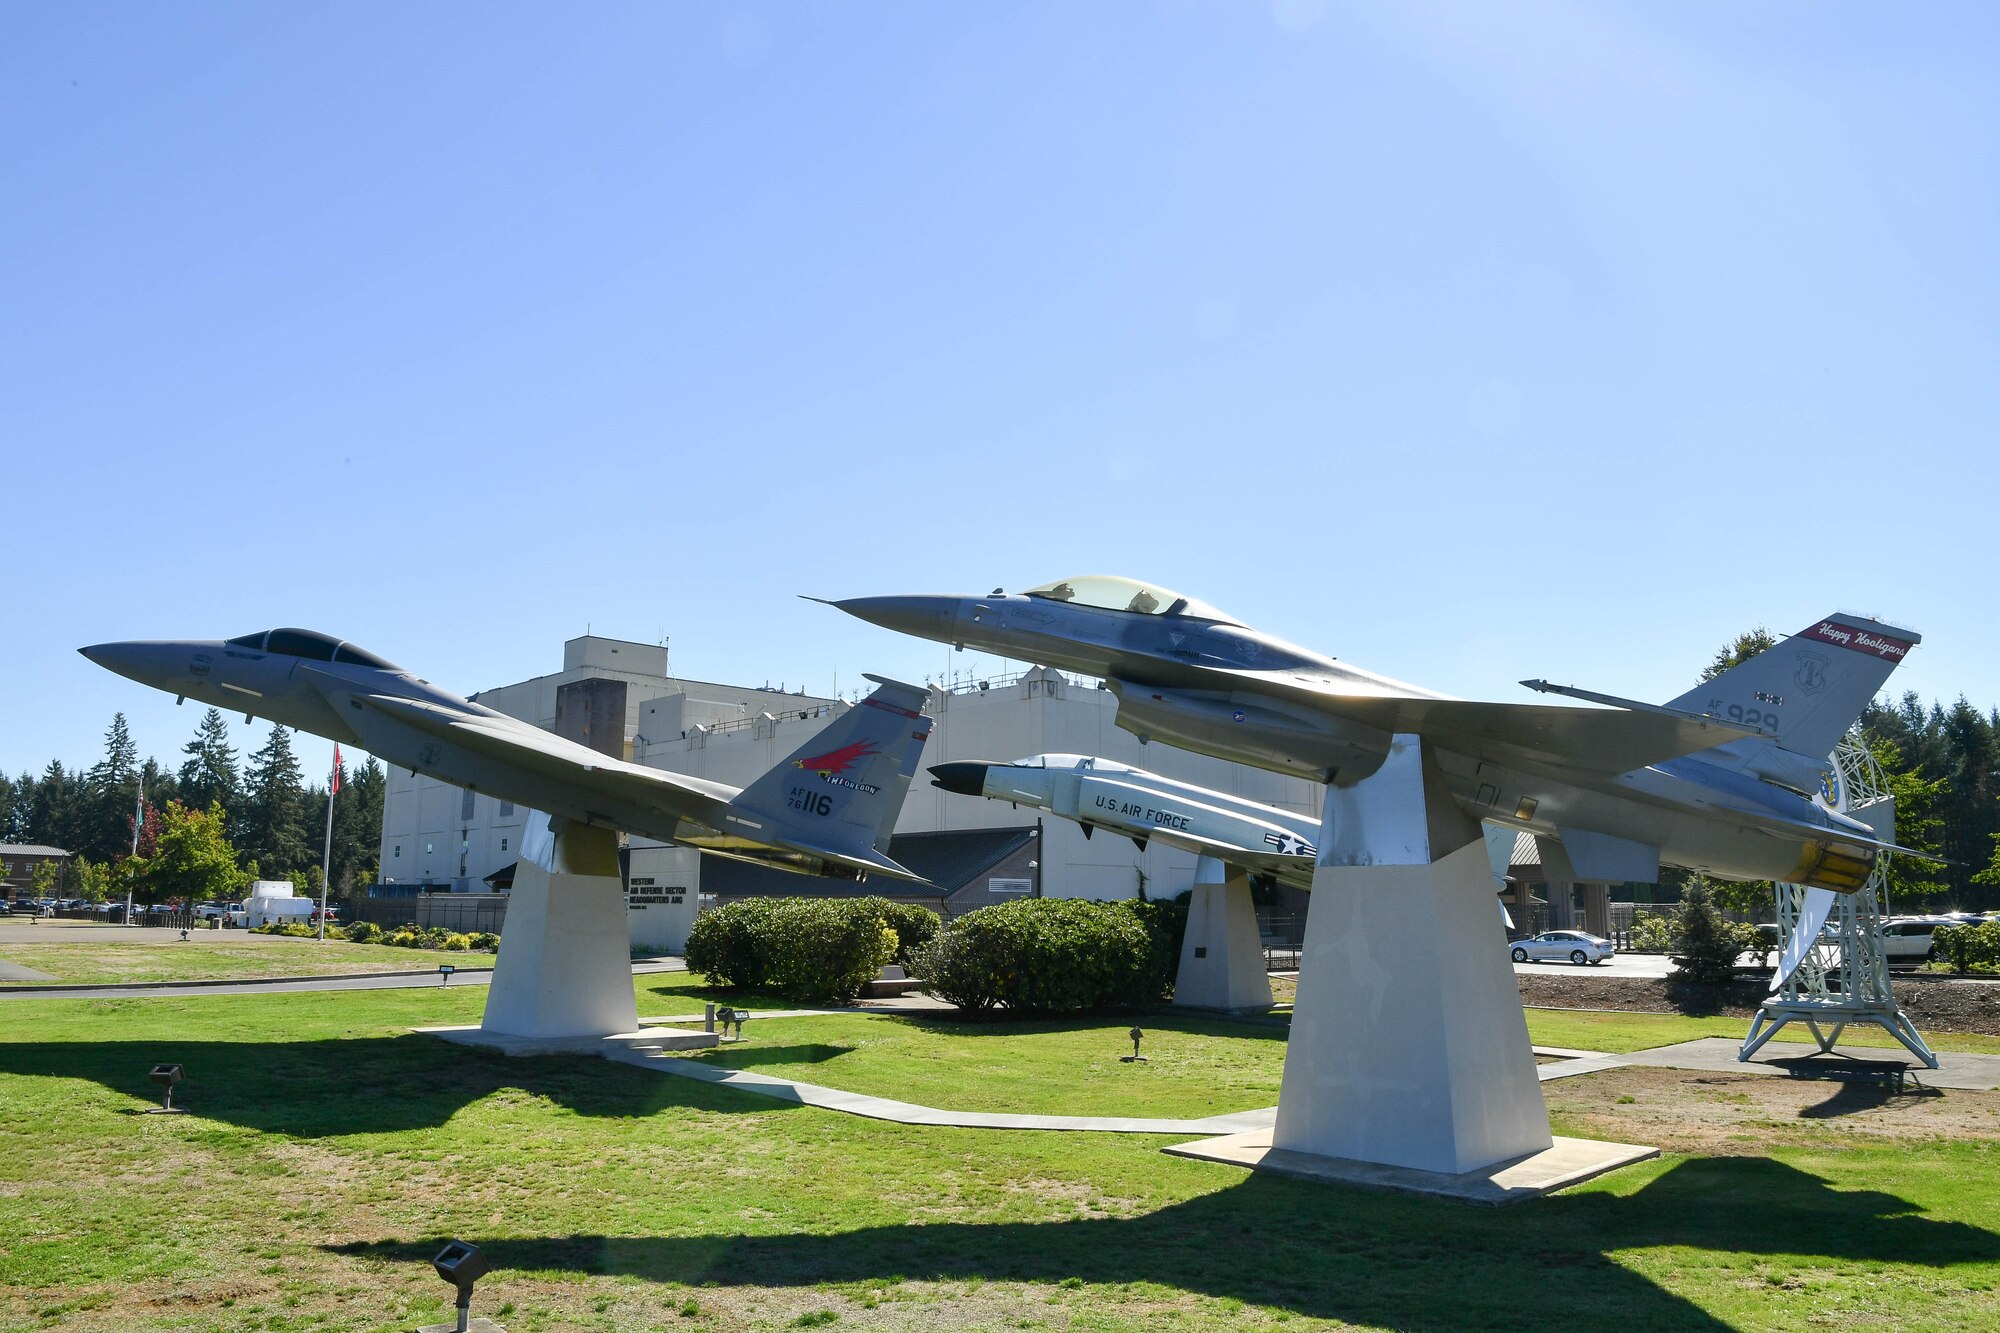 The Western Air Defense Sector adds a McDonald Douglas F-15A Eagle static display to the WADS Air Park.  The F-15 joins the General Dynamics F-16 Fighting Falcon, McDonald Douglas F-4 Phantom II, and FPS-26A Height Finder Radar. 
The WADS has been guarding America's skies in the same building 24/7 since 1960 and regularly uses F-15 alert aircraft to perform its mission. (U.S. Air National Guard photo by Capt. Kimberly D. Burke)
